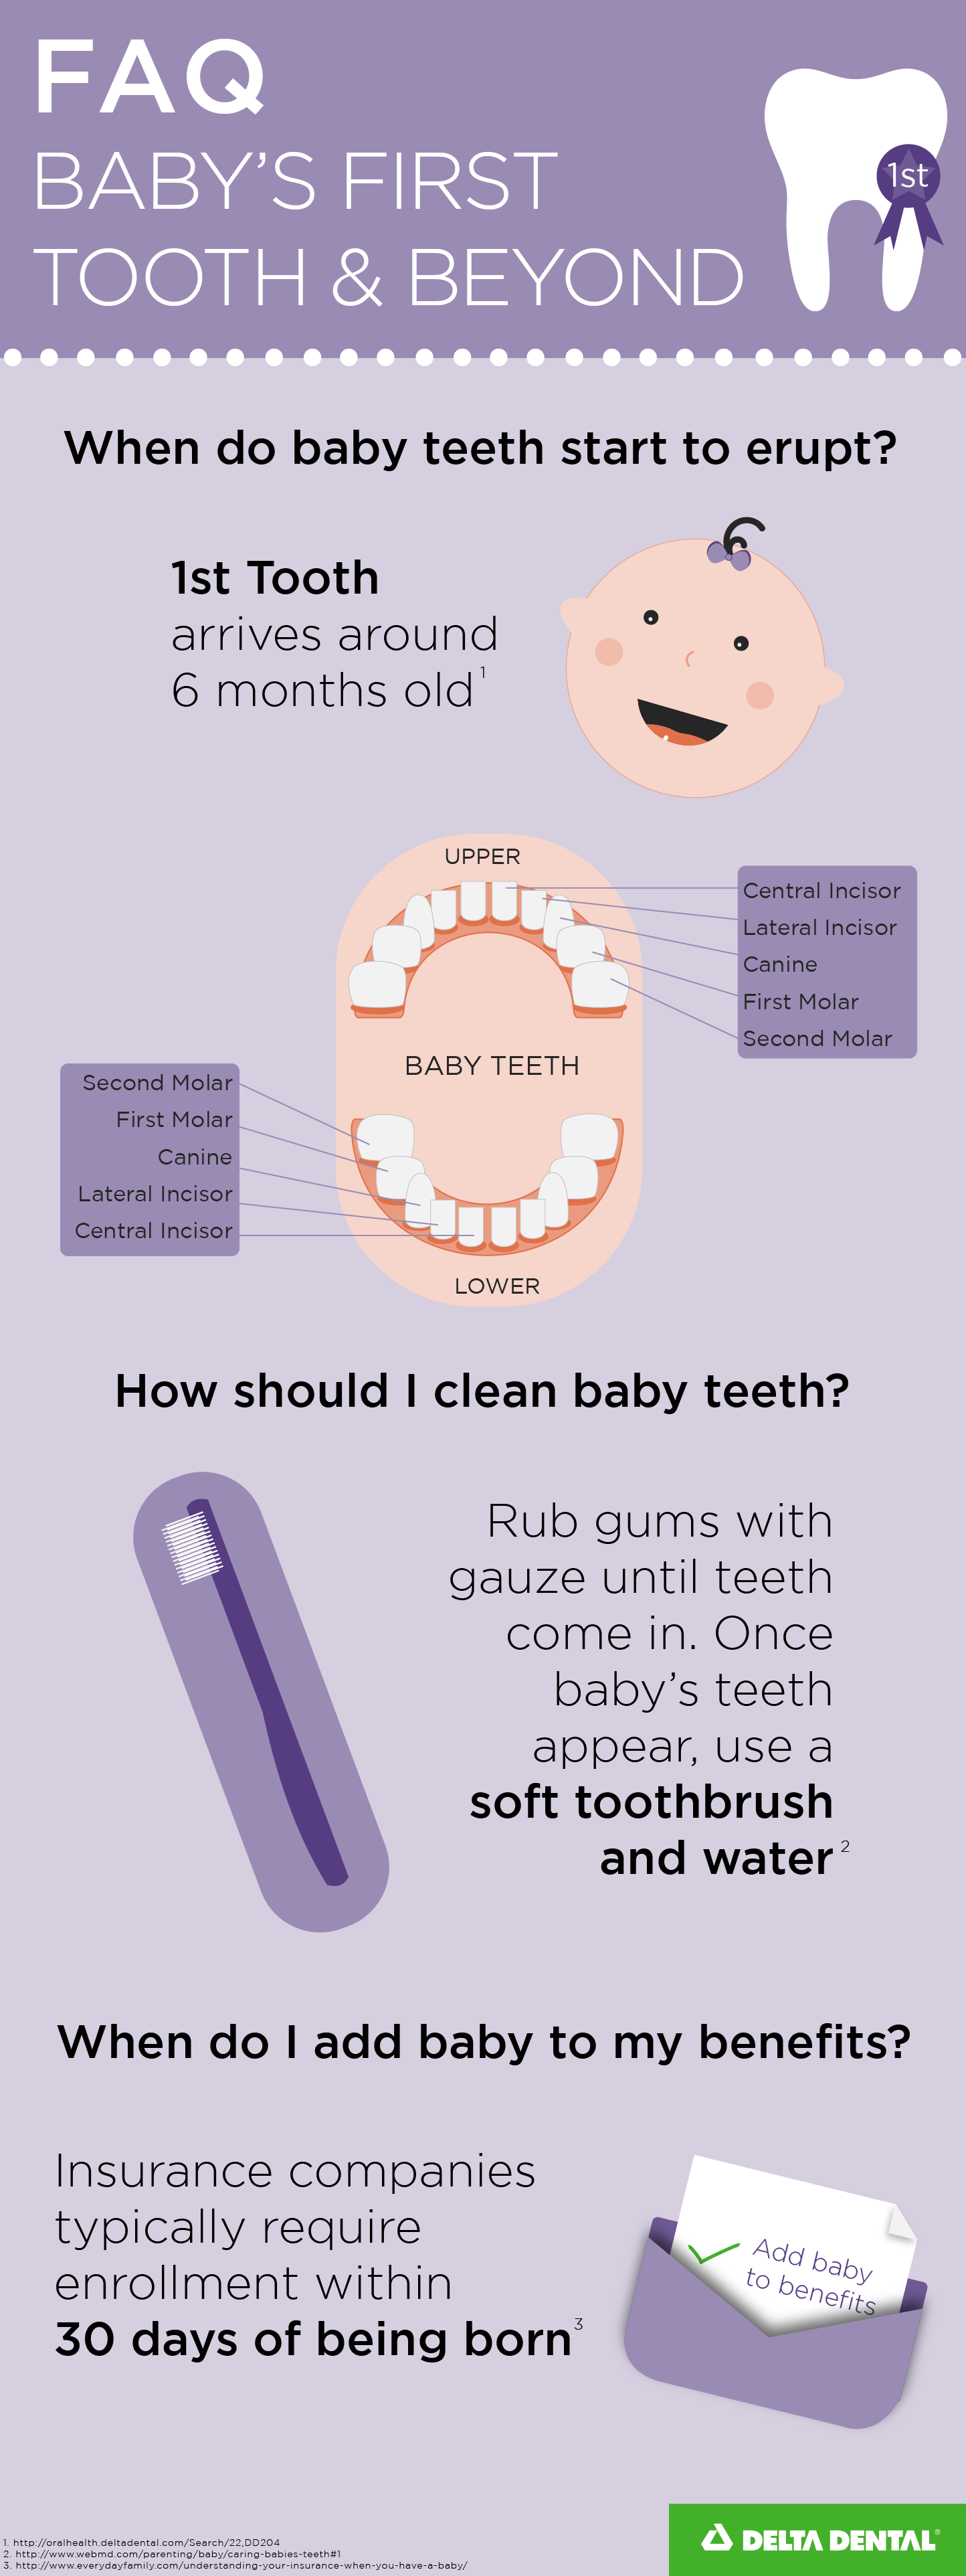 faq-babys-first-tooth-and-beyond